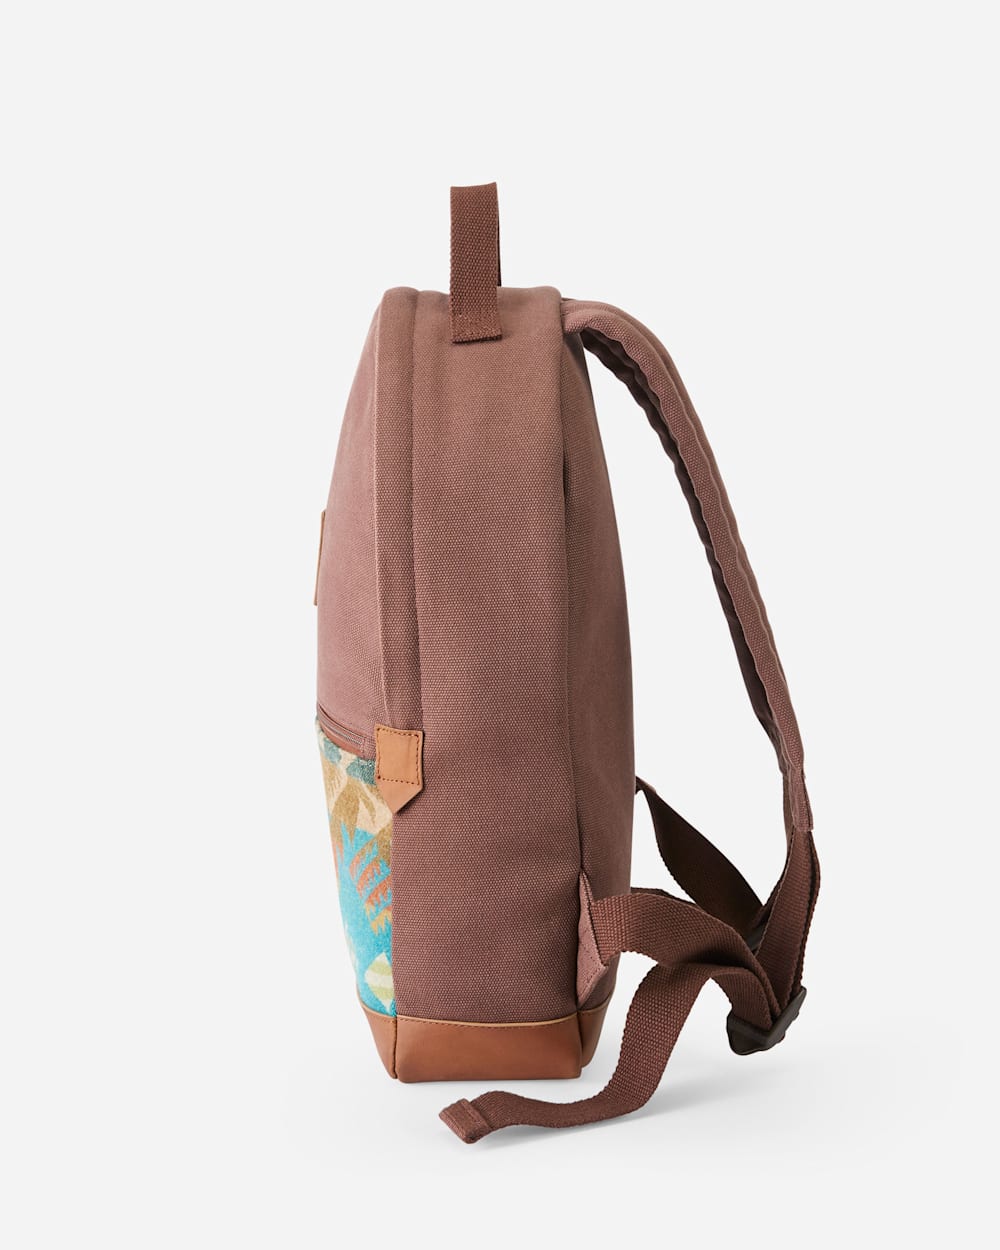 ALTERNATE VIEW OF JOURNEY WEST CANVAS BACKPACK IN TURQUOISE image number 2